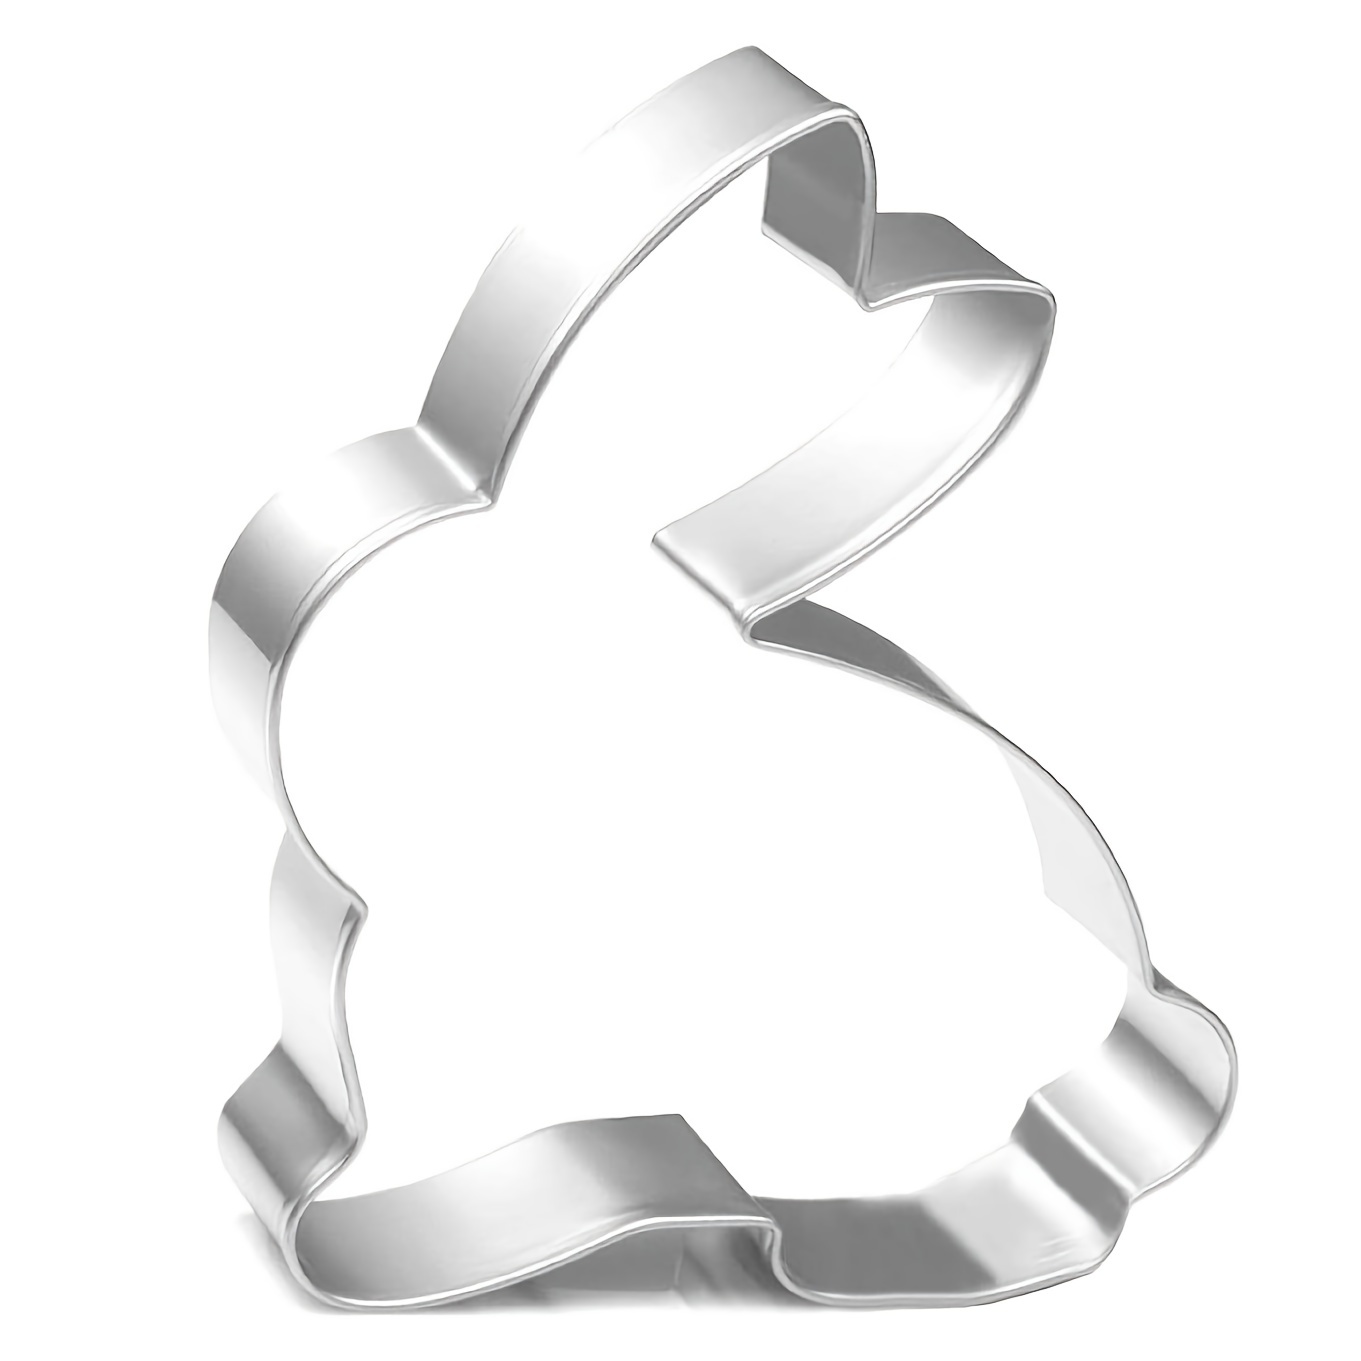 Crethinkaty Easter Cookie Cutter Set - 5 Pieces Stainless Steel Cutters for Baking - Egg, Carrot, Rabbit, Bunny Face,and Bunny